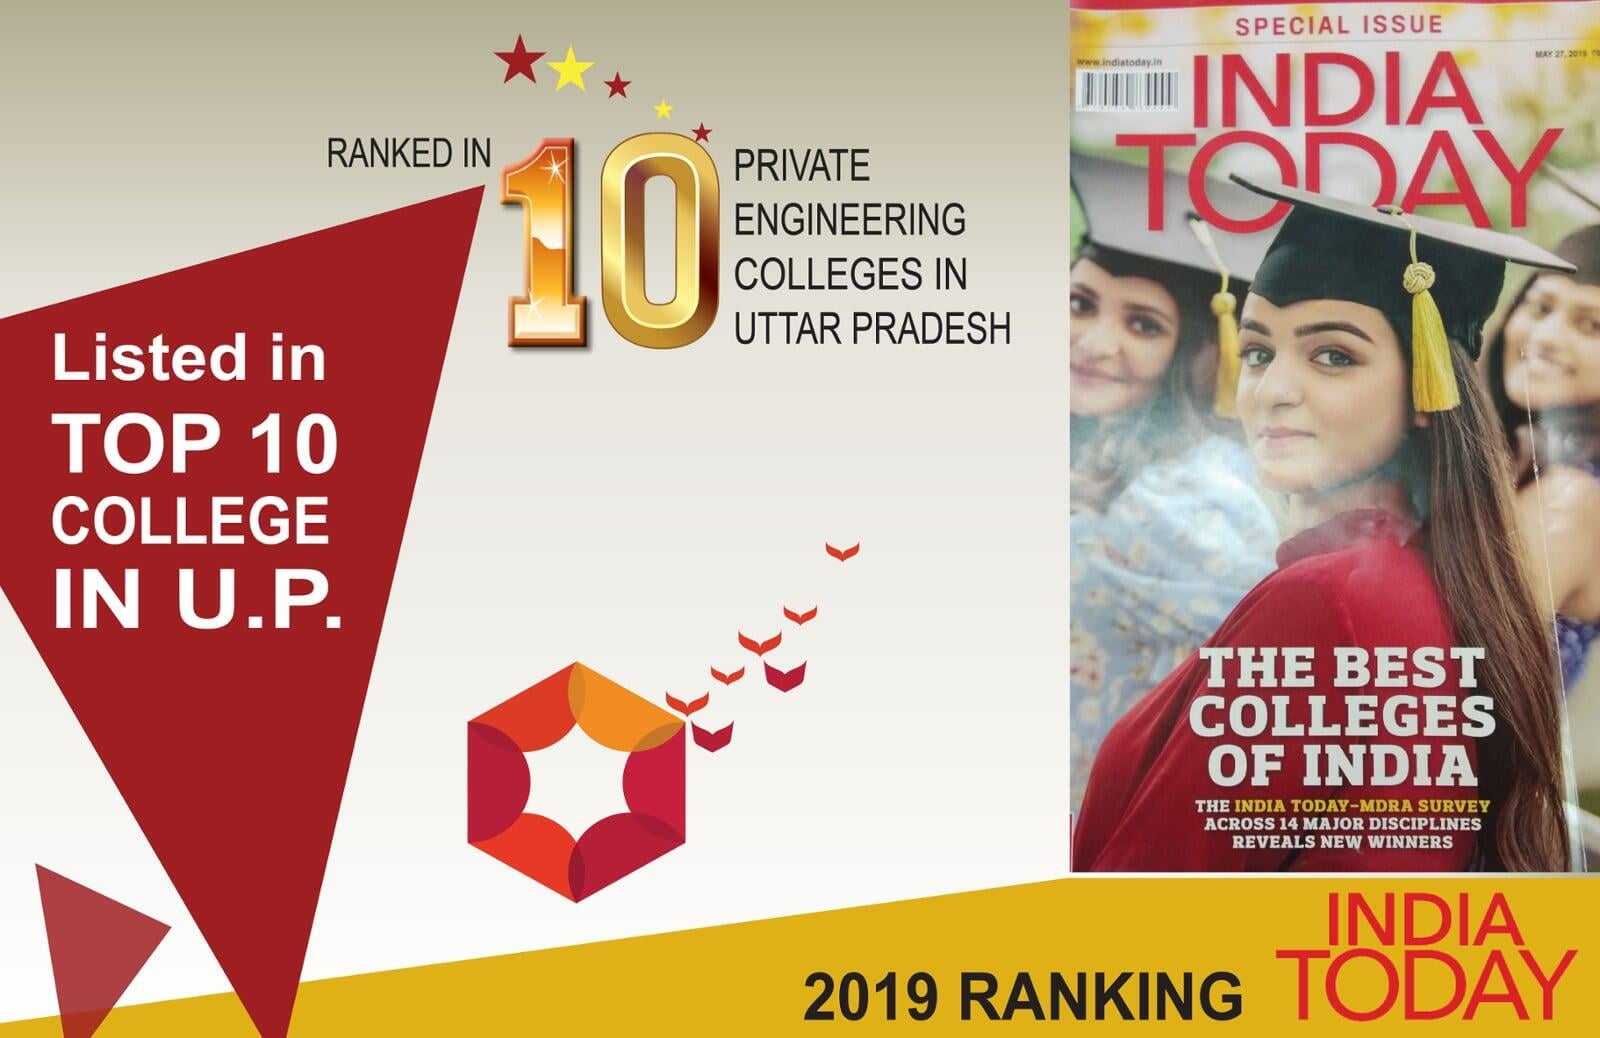 Top 10 Private Engineering Colleges in Uttar Pradesh" by India Today